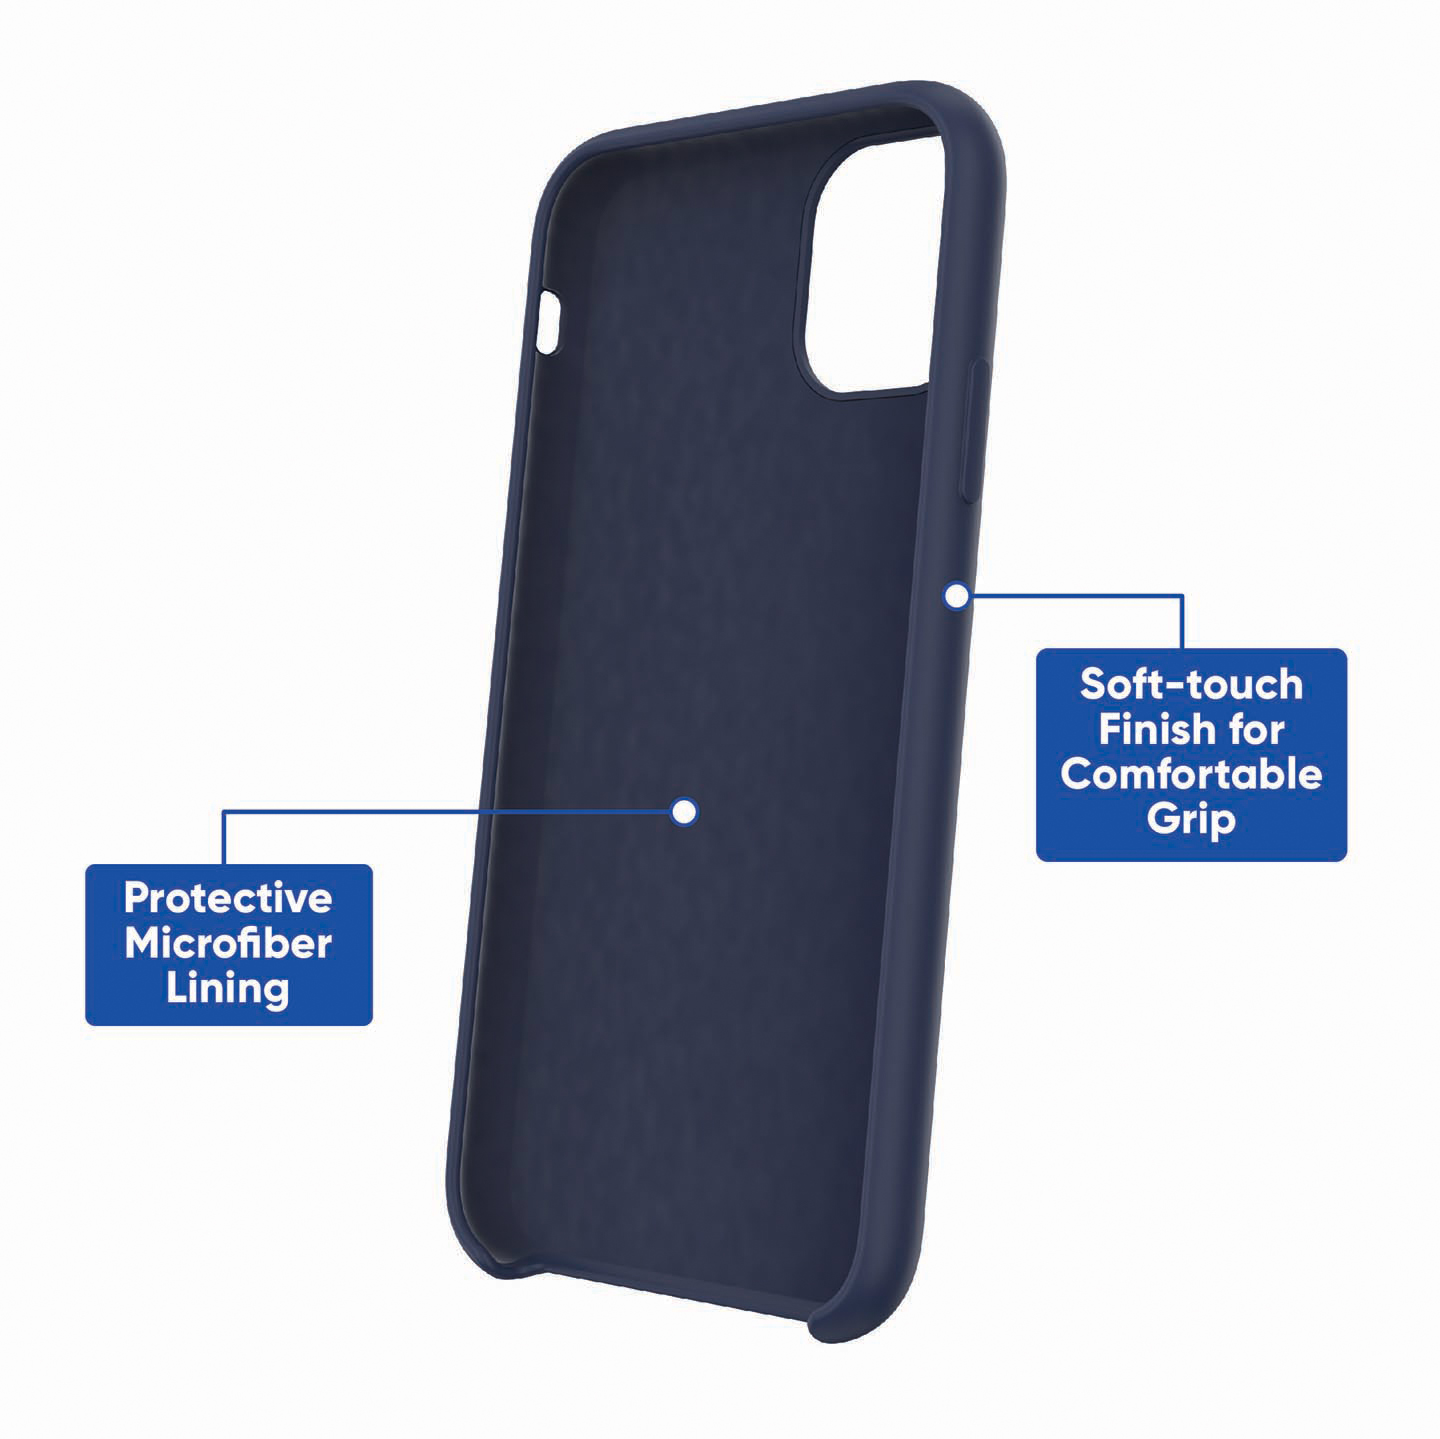 onn. Silicone Phone Case for iPhone 11, iPhone XR - image 3 of 6